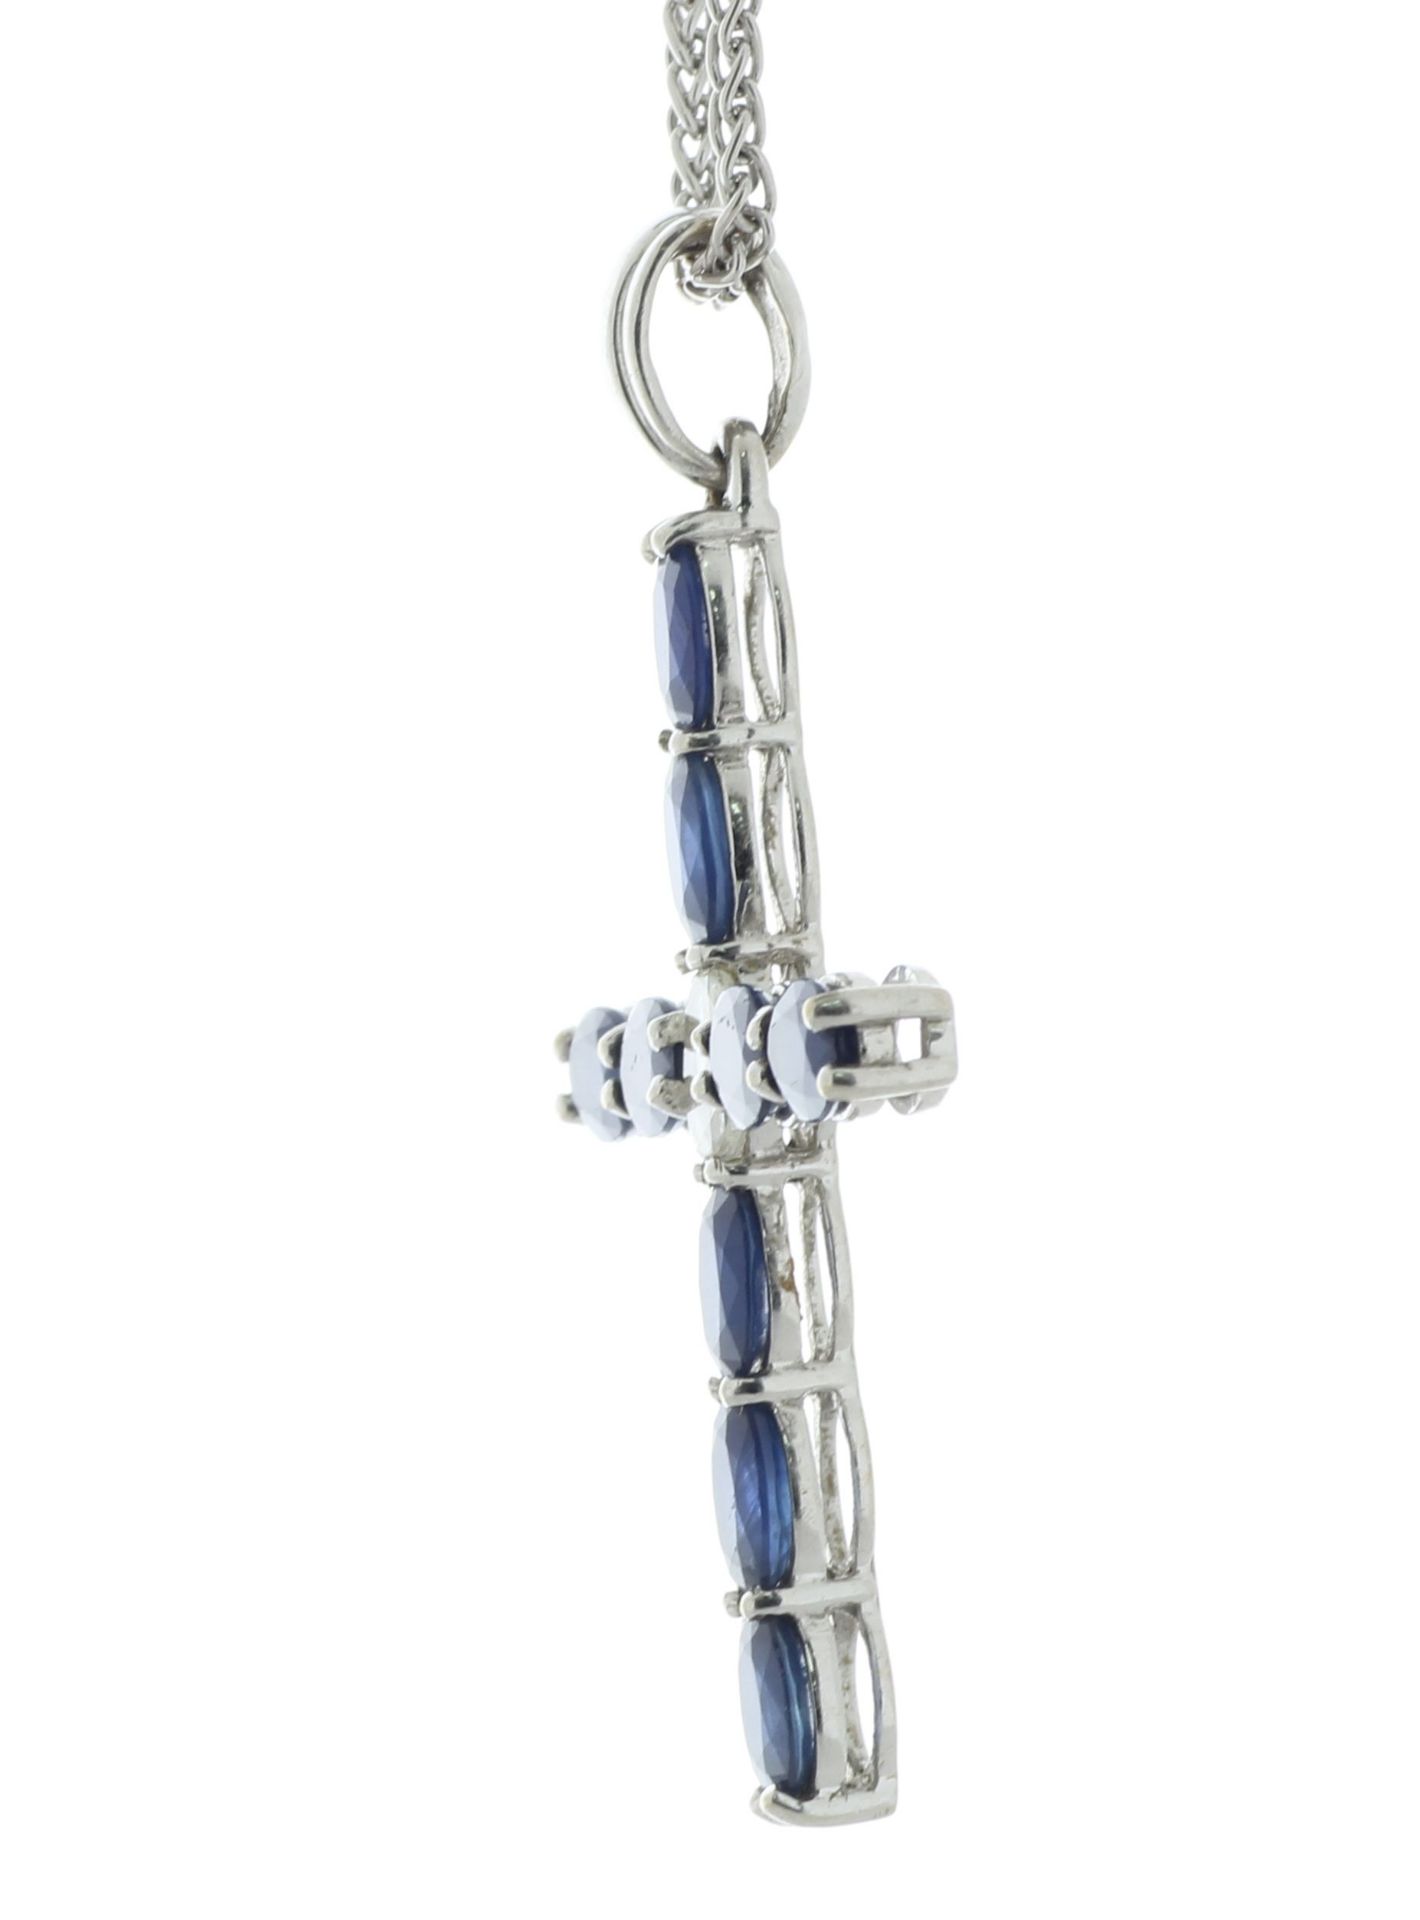 18ct White Gold Diamond And Sapphire Cross Pendant And 18" Chain (S4.23) 0.32 Carats - Image 2 of 3